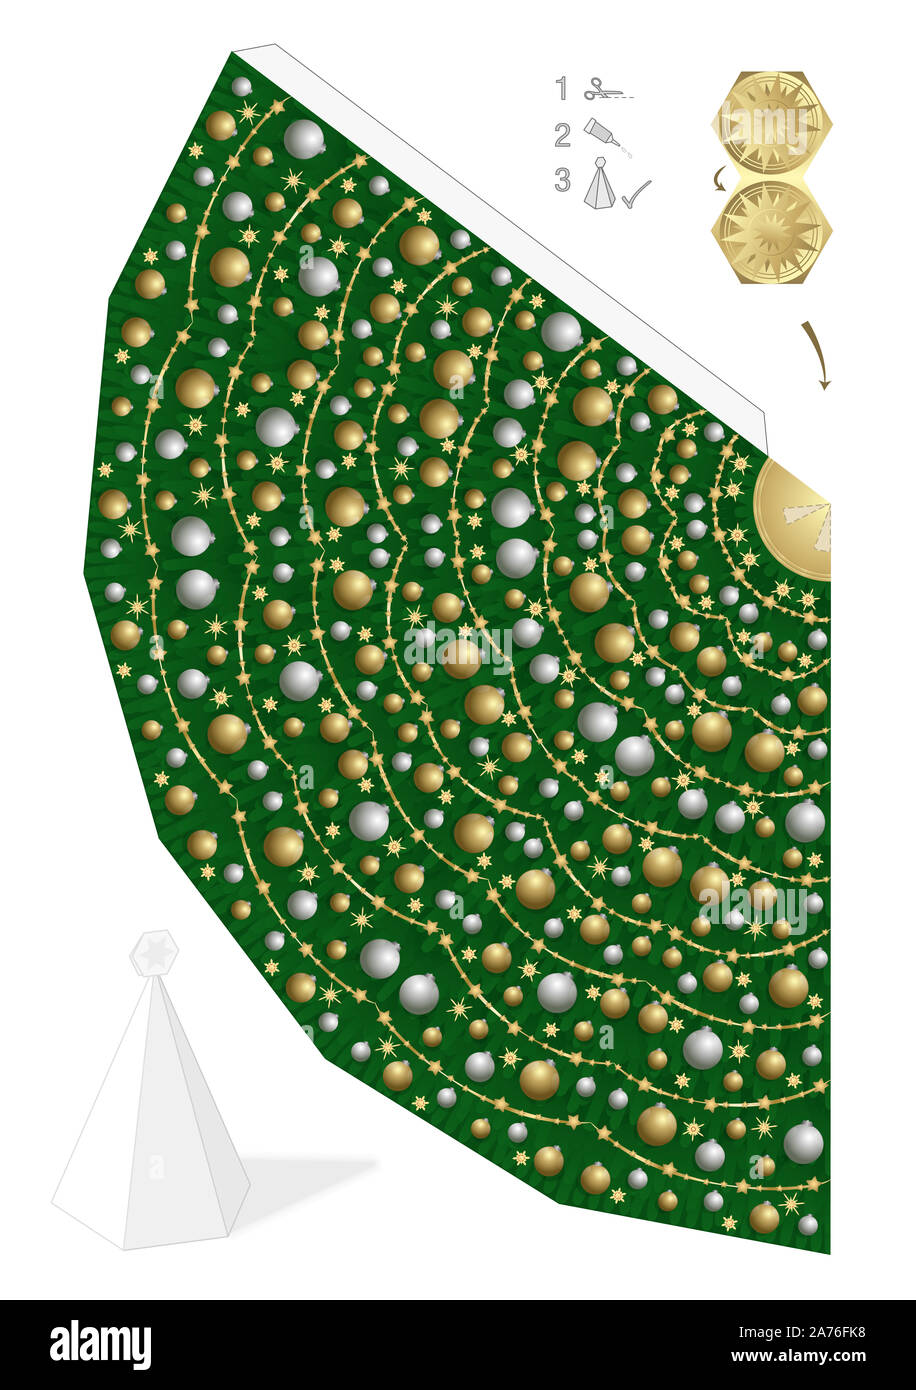 Christmas tree template. Easy 3D paper model to cut out, fold and glue. Creative fun. Decorated tree with golden and silver christmas balls. Stock Photo